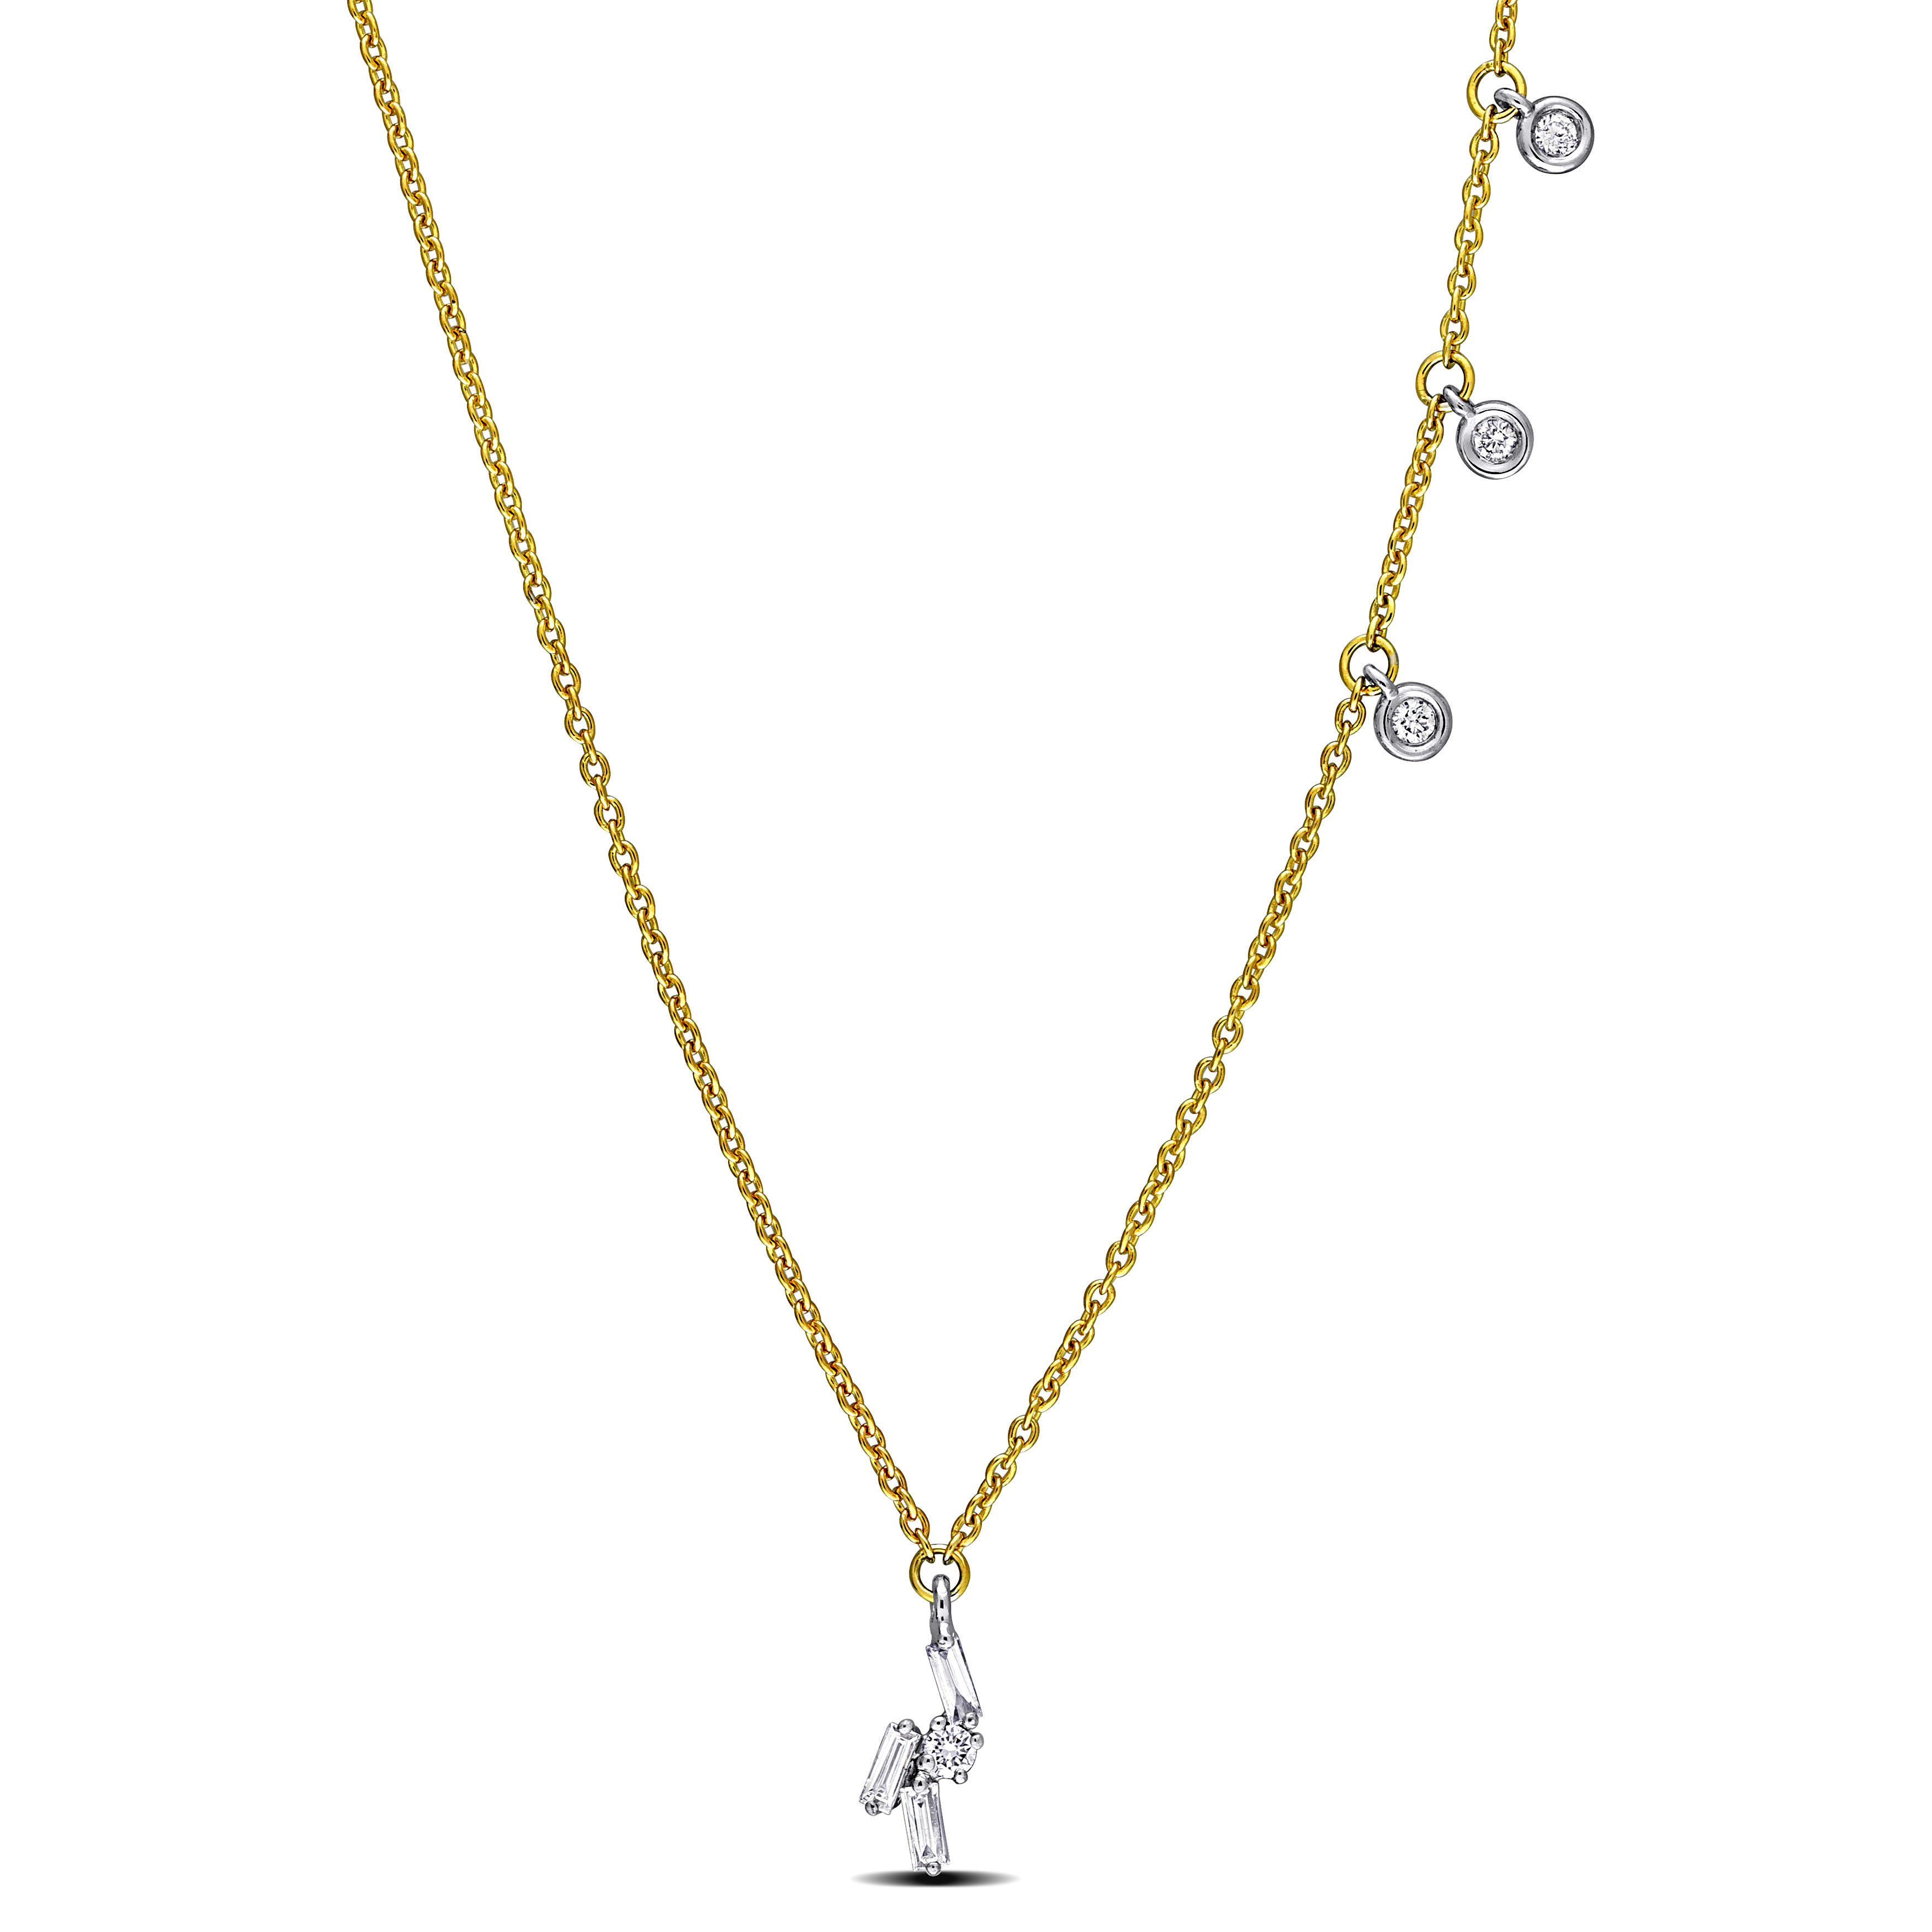 1/4 CT TDW Parallel Baguette-Cut Diamond Station Necklace in 14k Two-Tone White and Yellow Gold - 17 in.